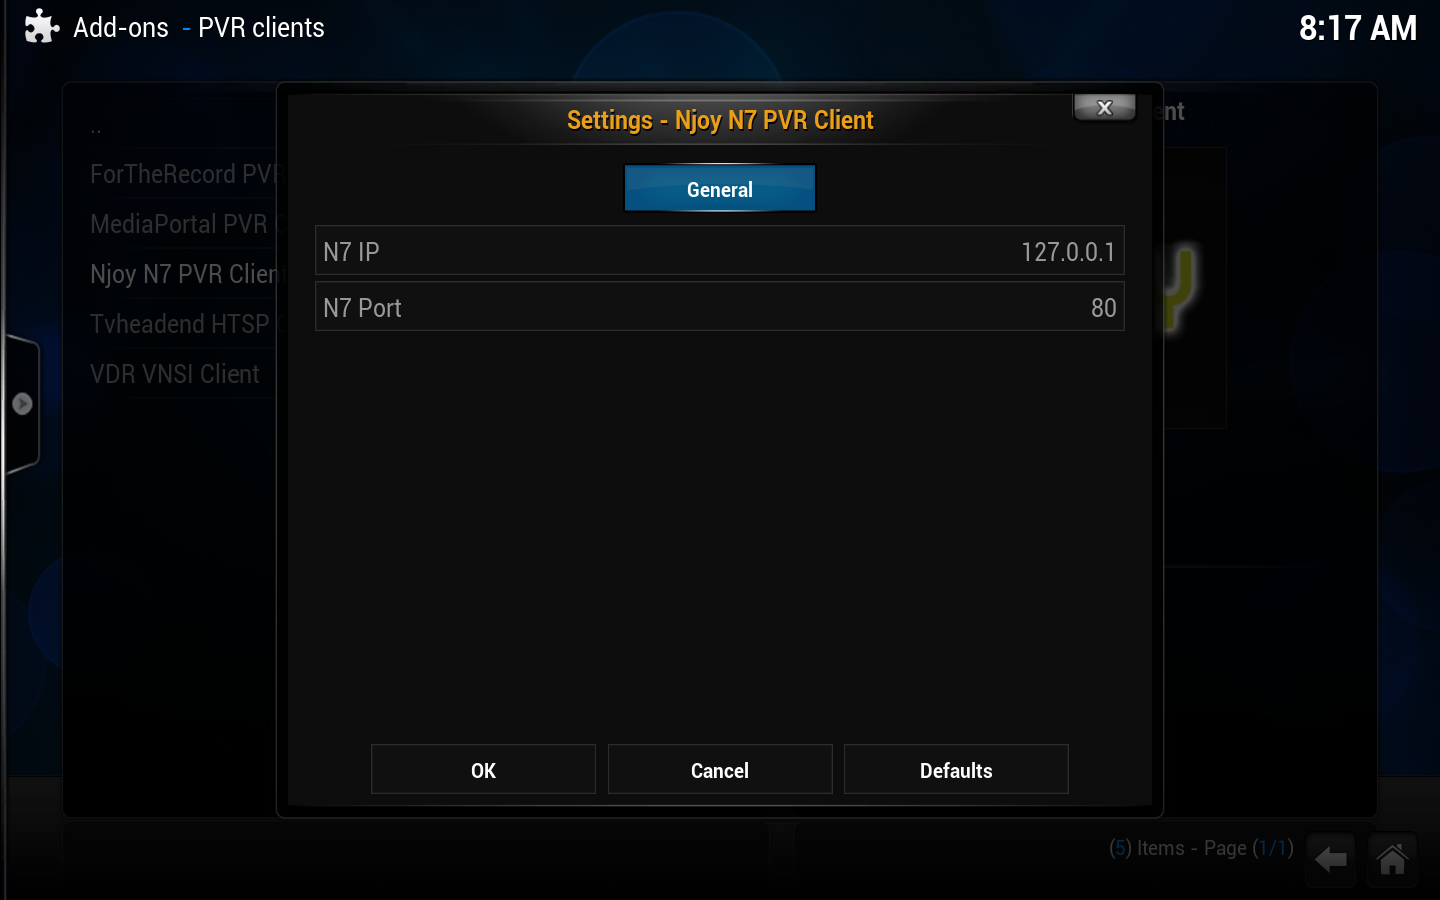 Njoy N7 PVR Client.settings.png